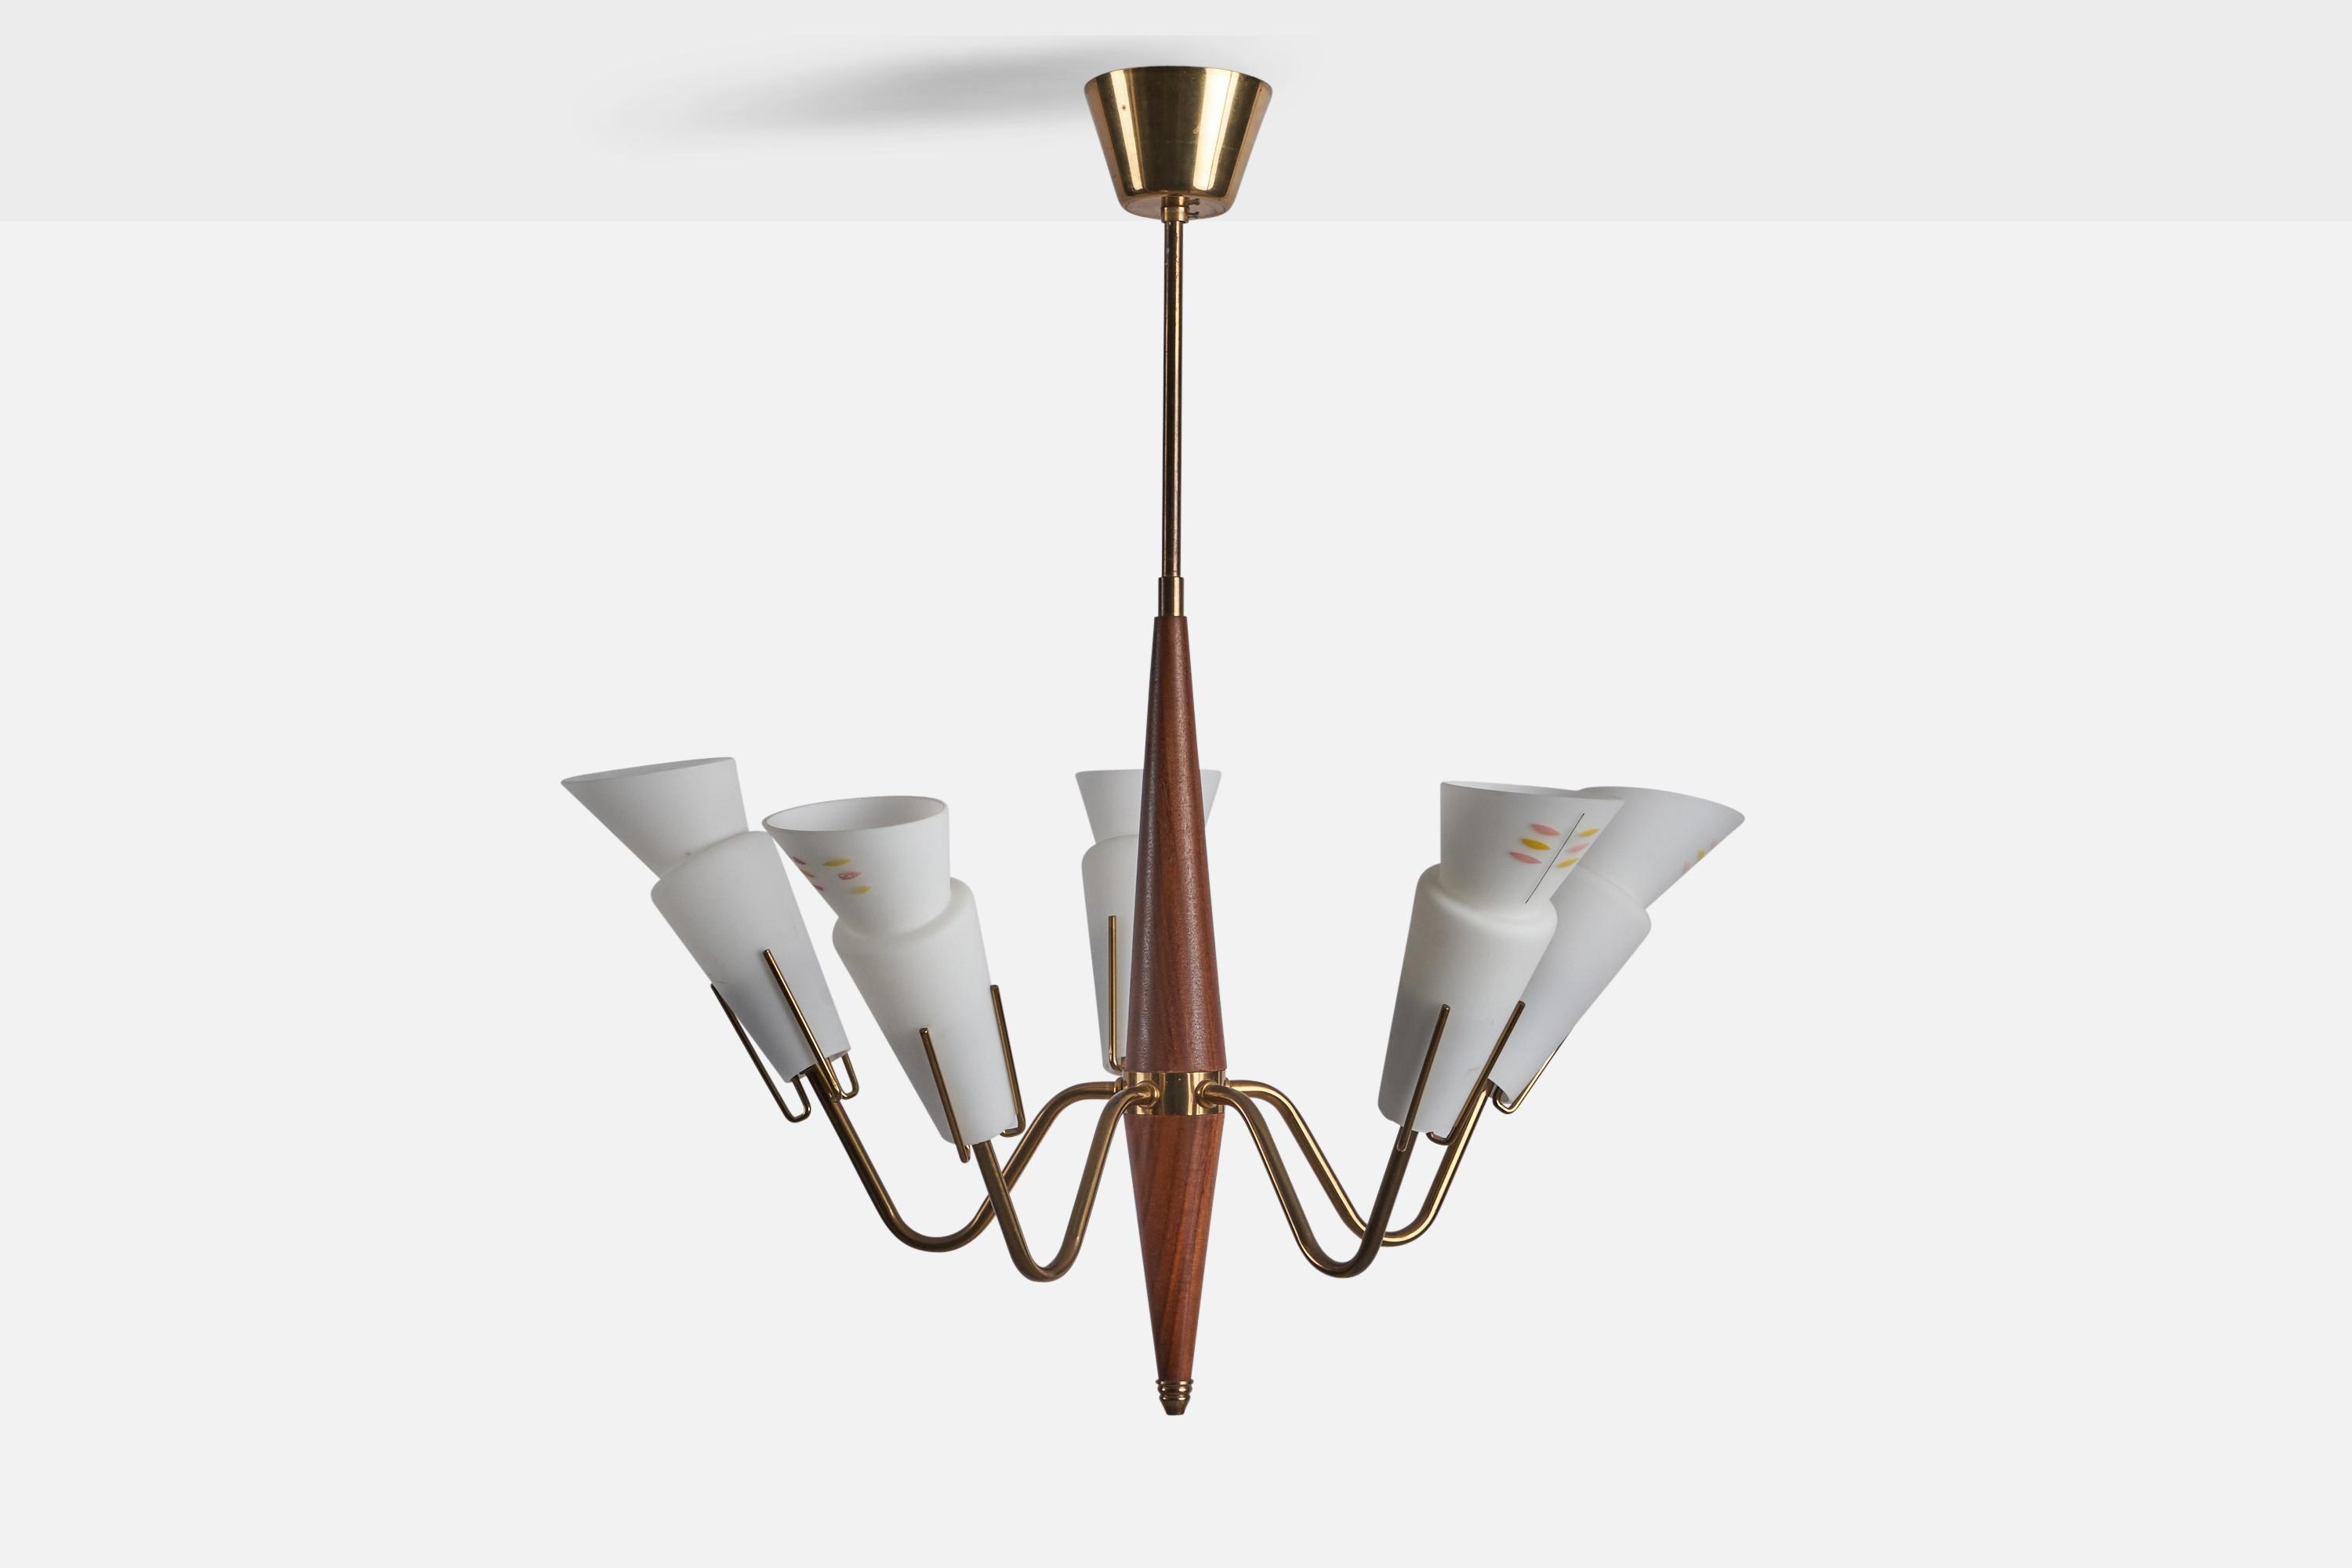 A five-armed brass, teak and etched opaline glass chandelier, designed and produced in Sweden, 1950s.

Overall Dimensions (inches): 25.5” H x 25” Diameter
Bulb Specifications: E-14 Bulb
Number of Sockets: 5